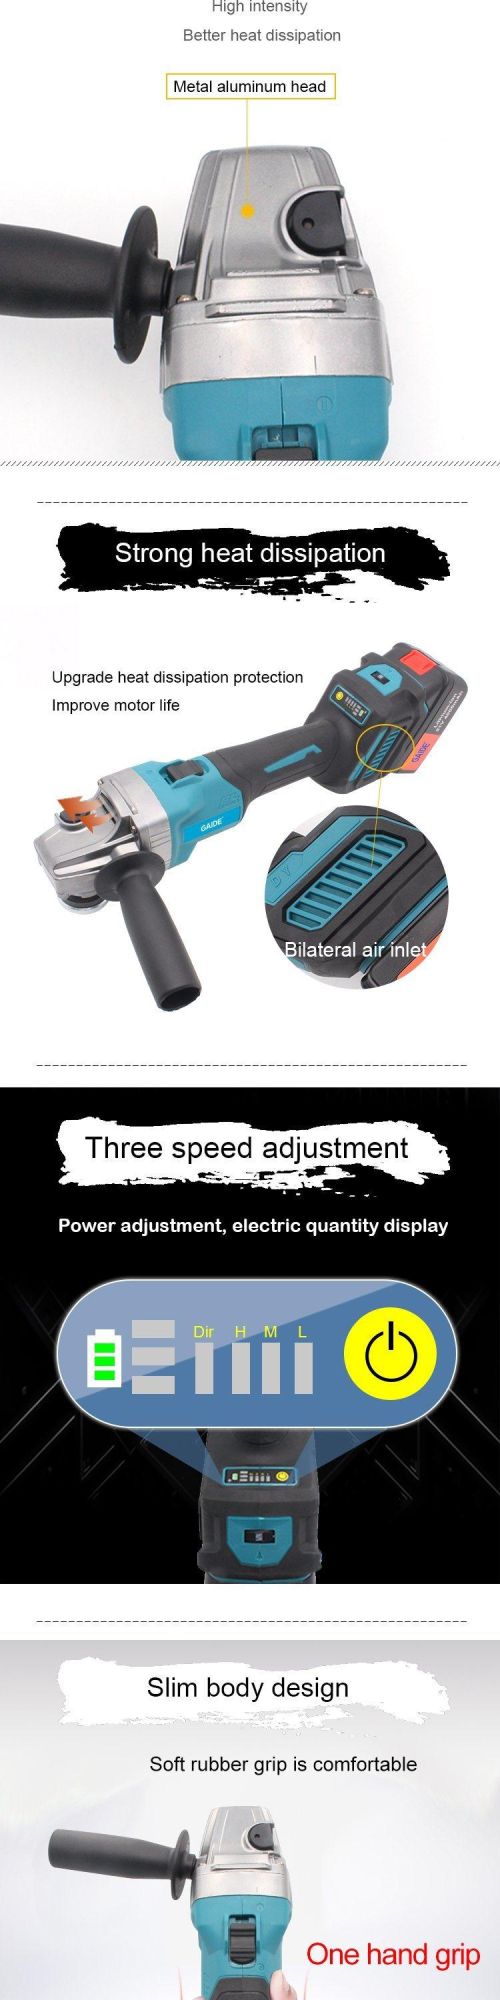 Cordless Angle Grinder with Battery Charger Wheel Guard Spanner